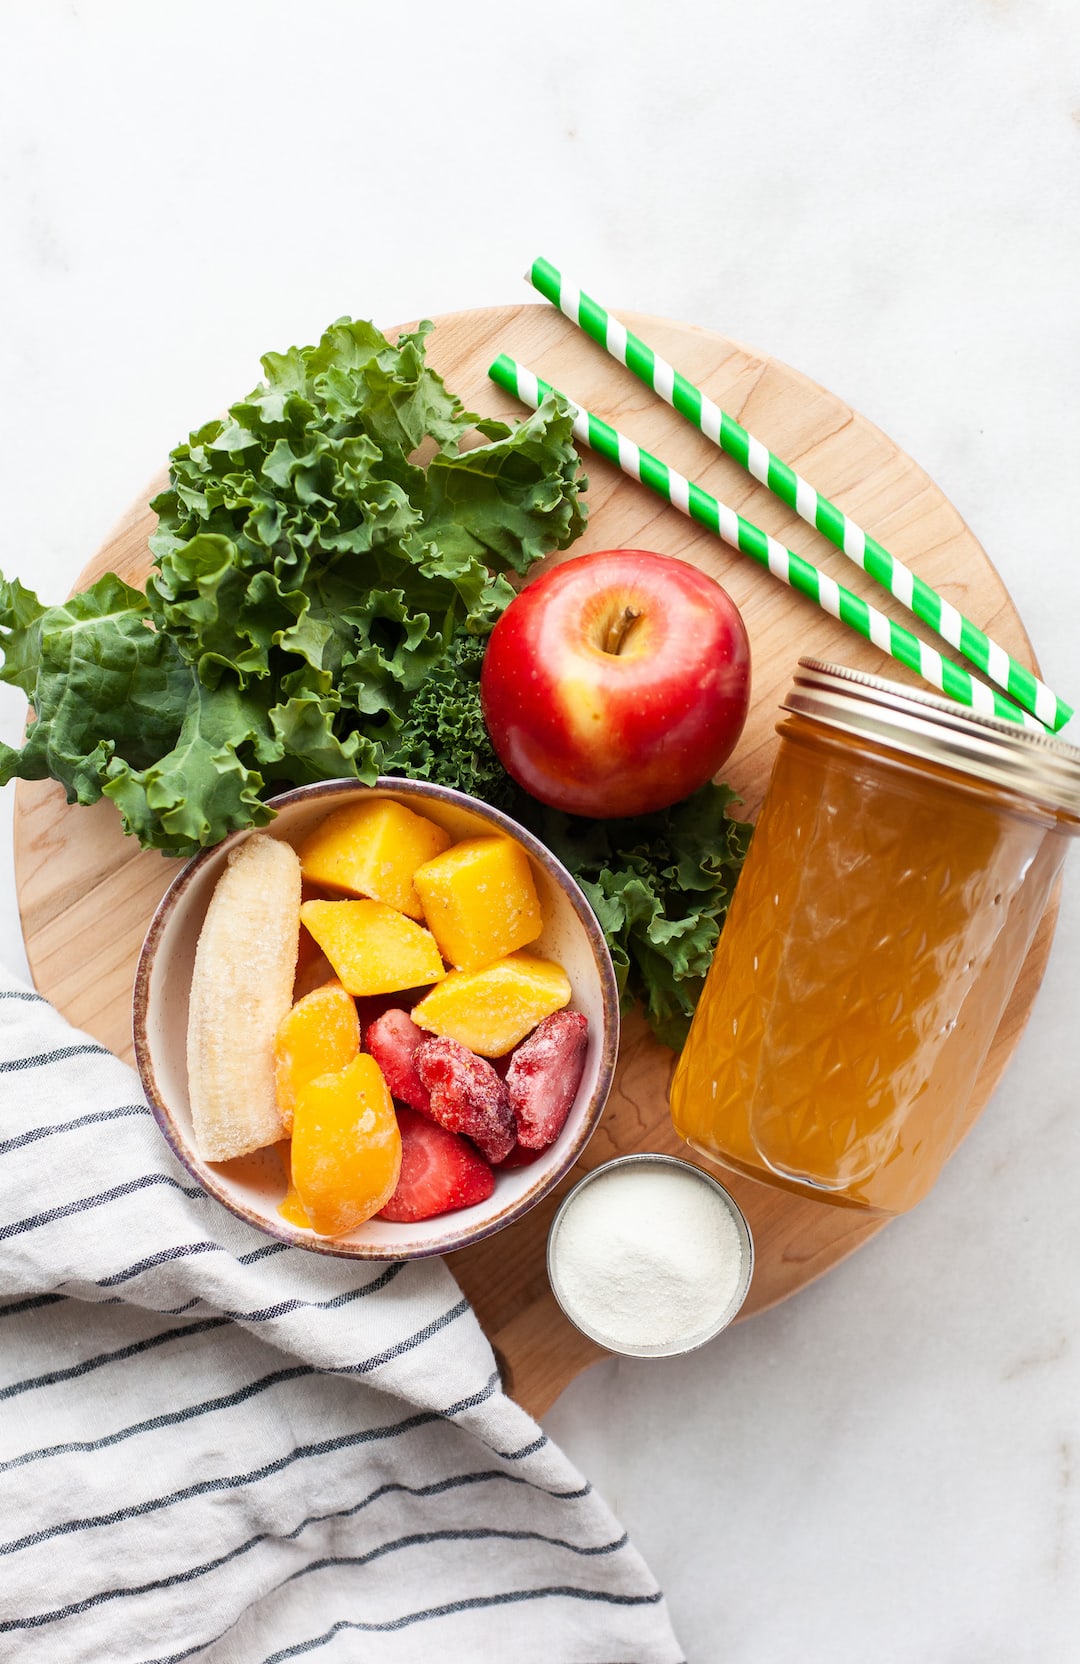 image of a wood board topped with ingredients for apple greens smoothie including frozen fruit, apple, kale, and juice